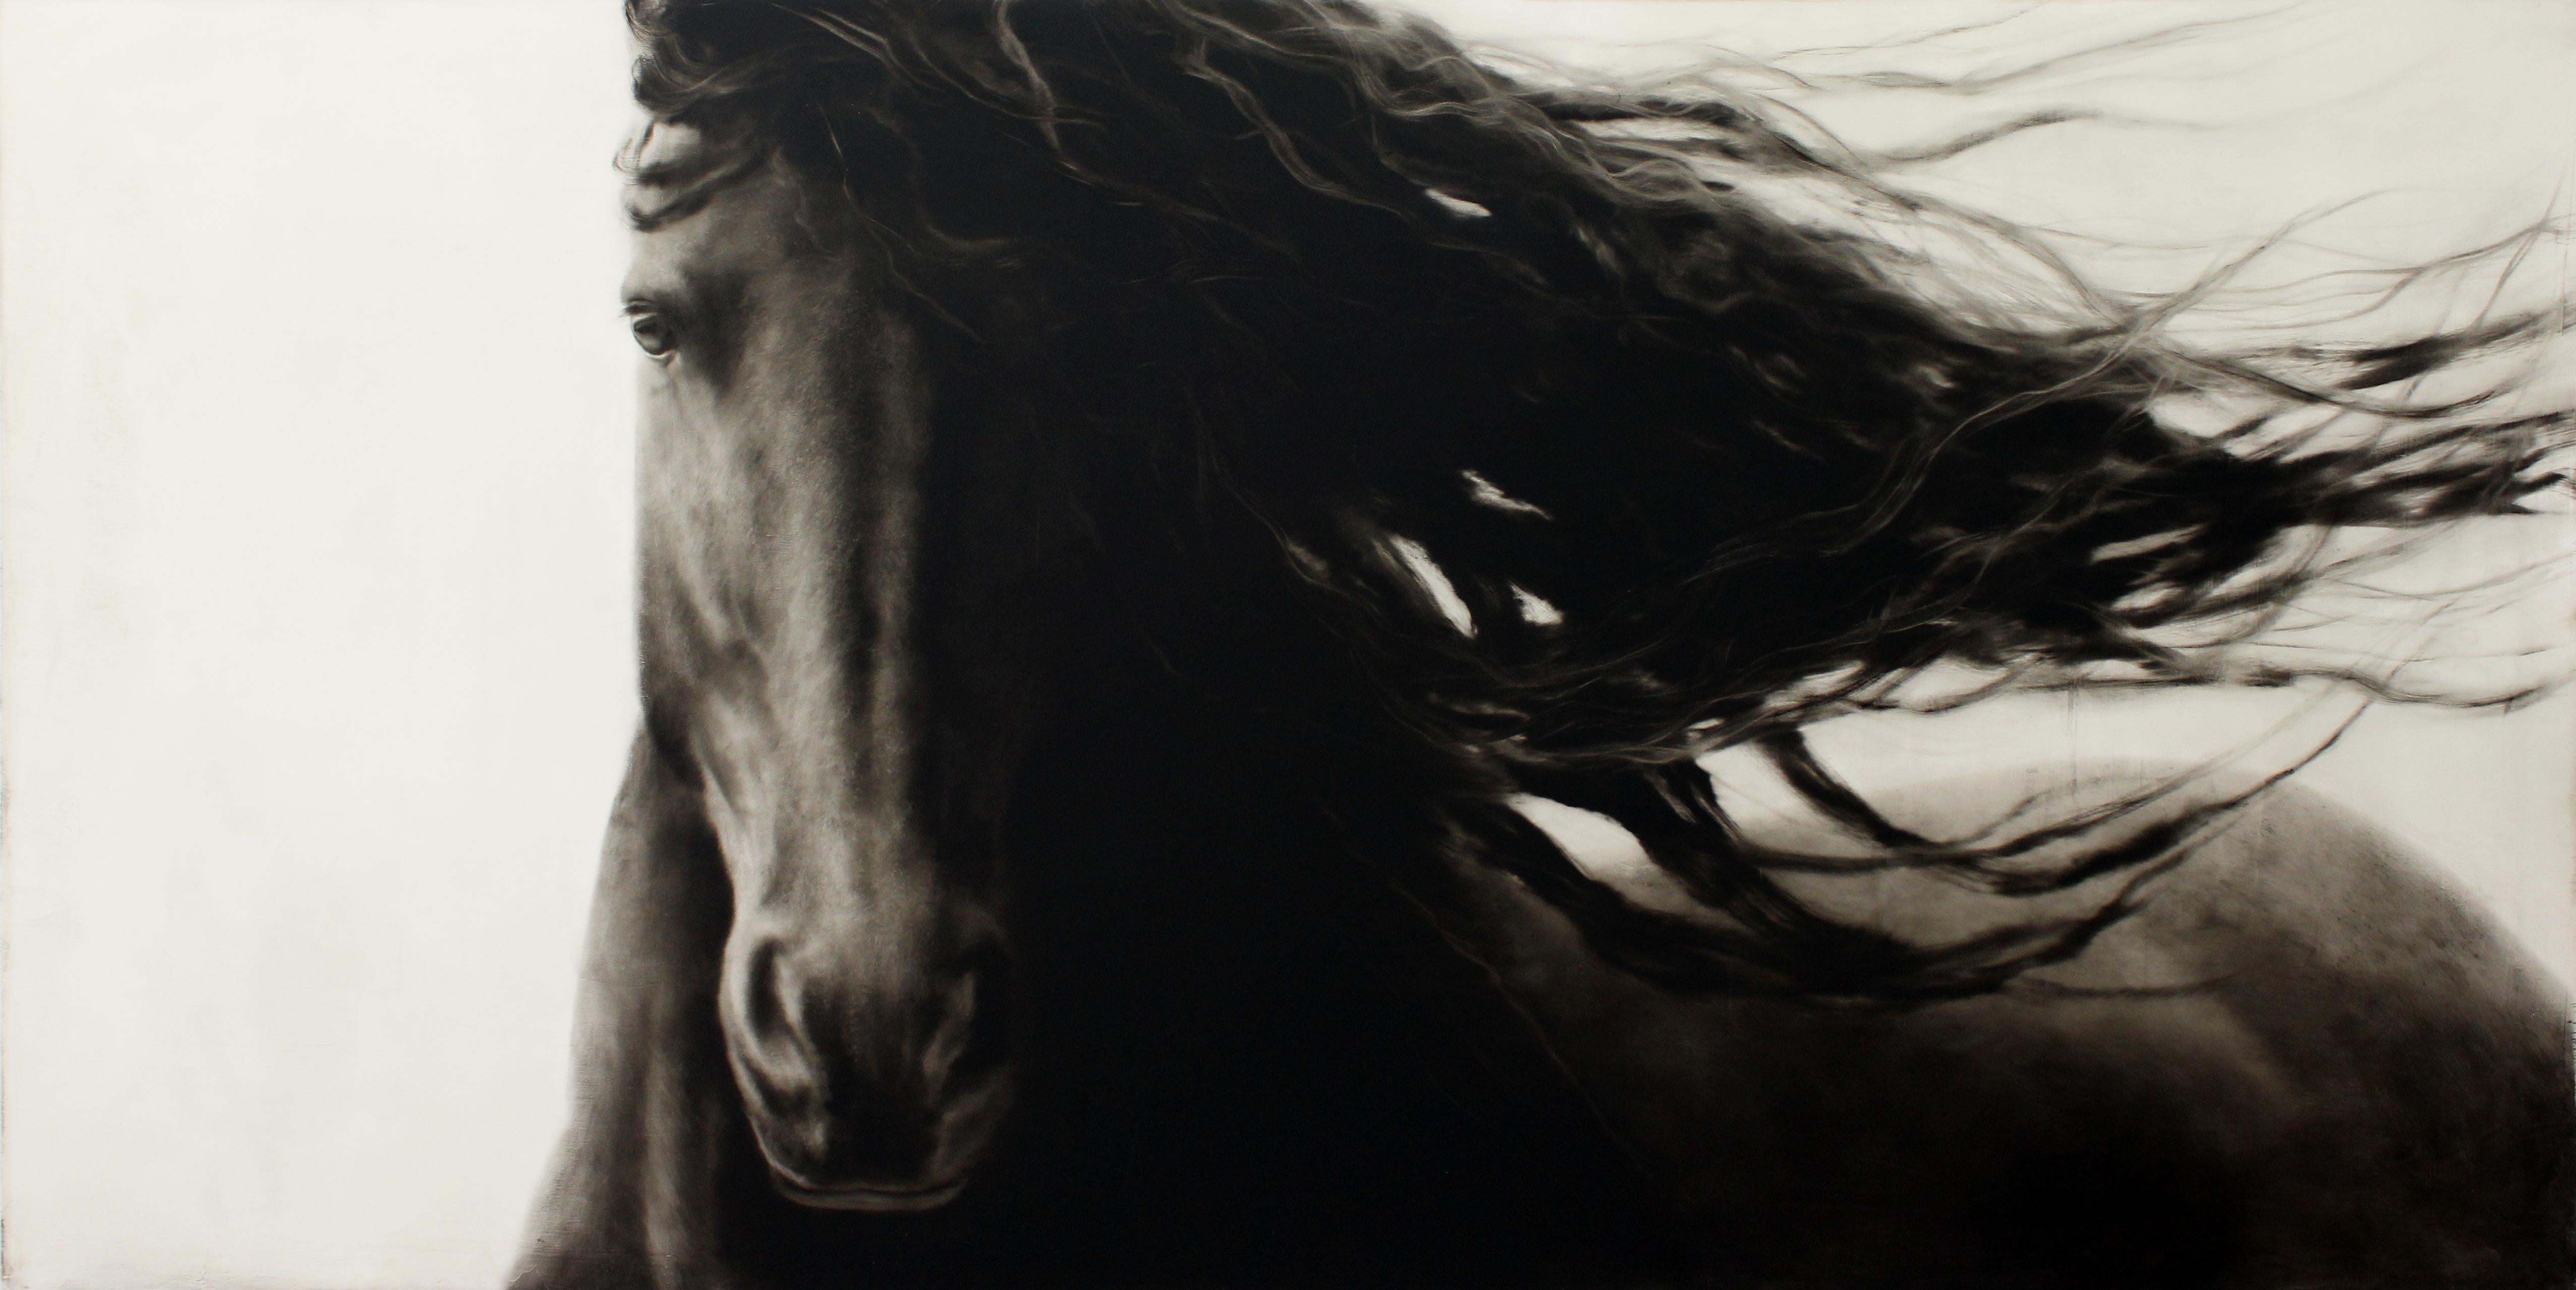 "Angelic" photorealist oil painting of a dark horse with white background